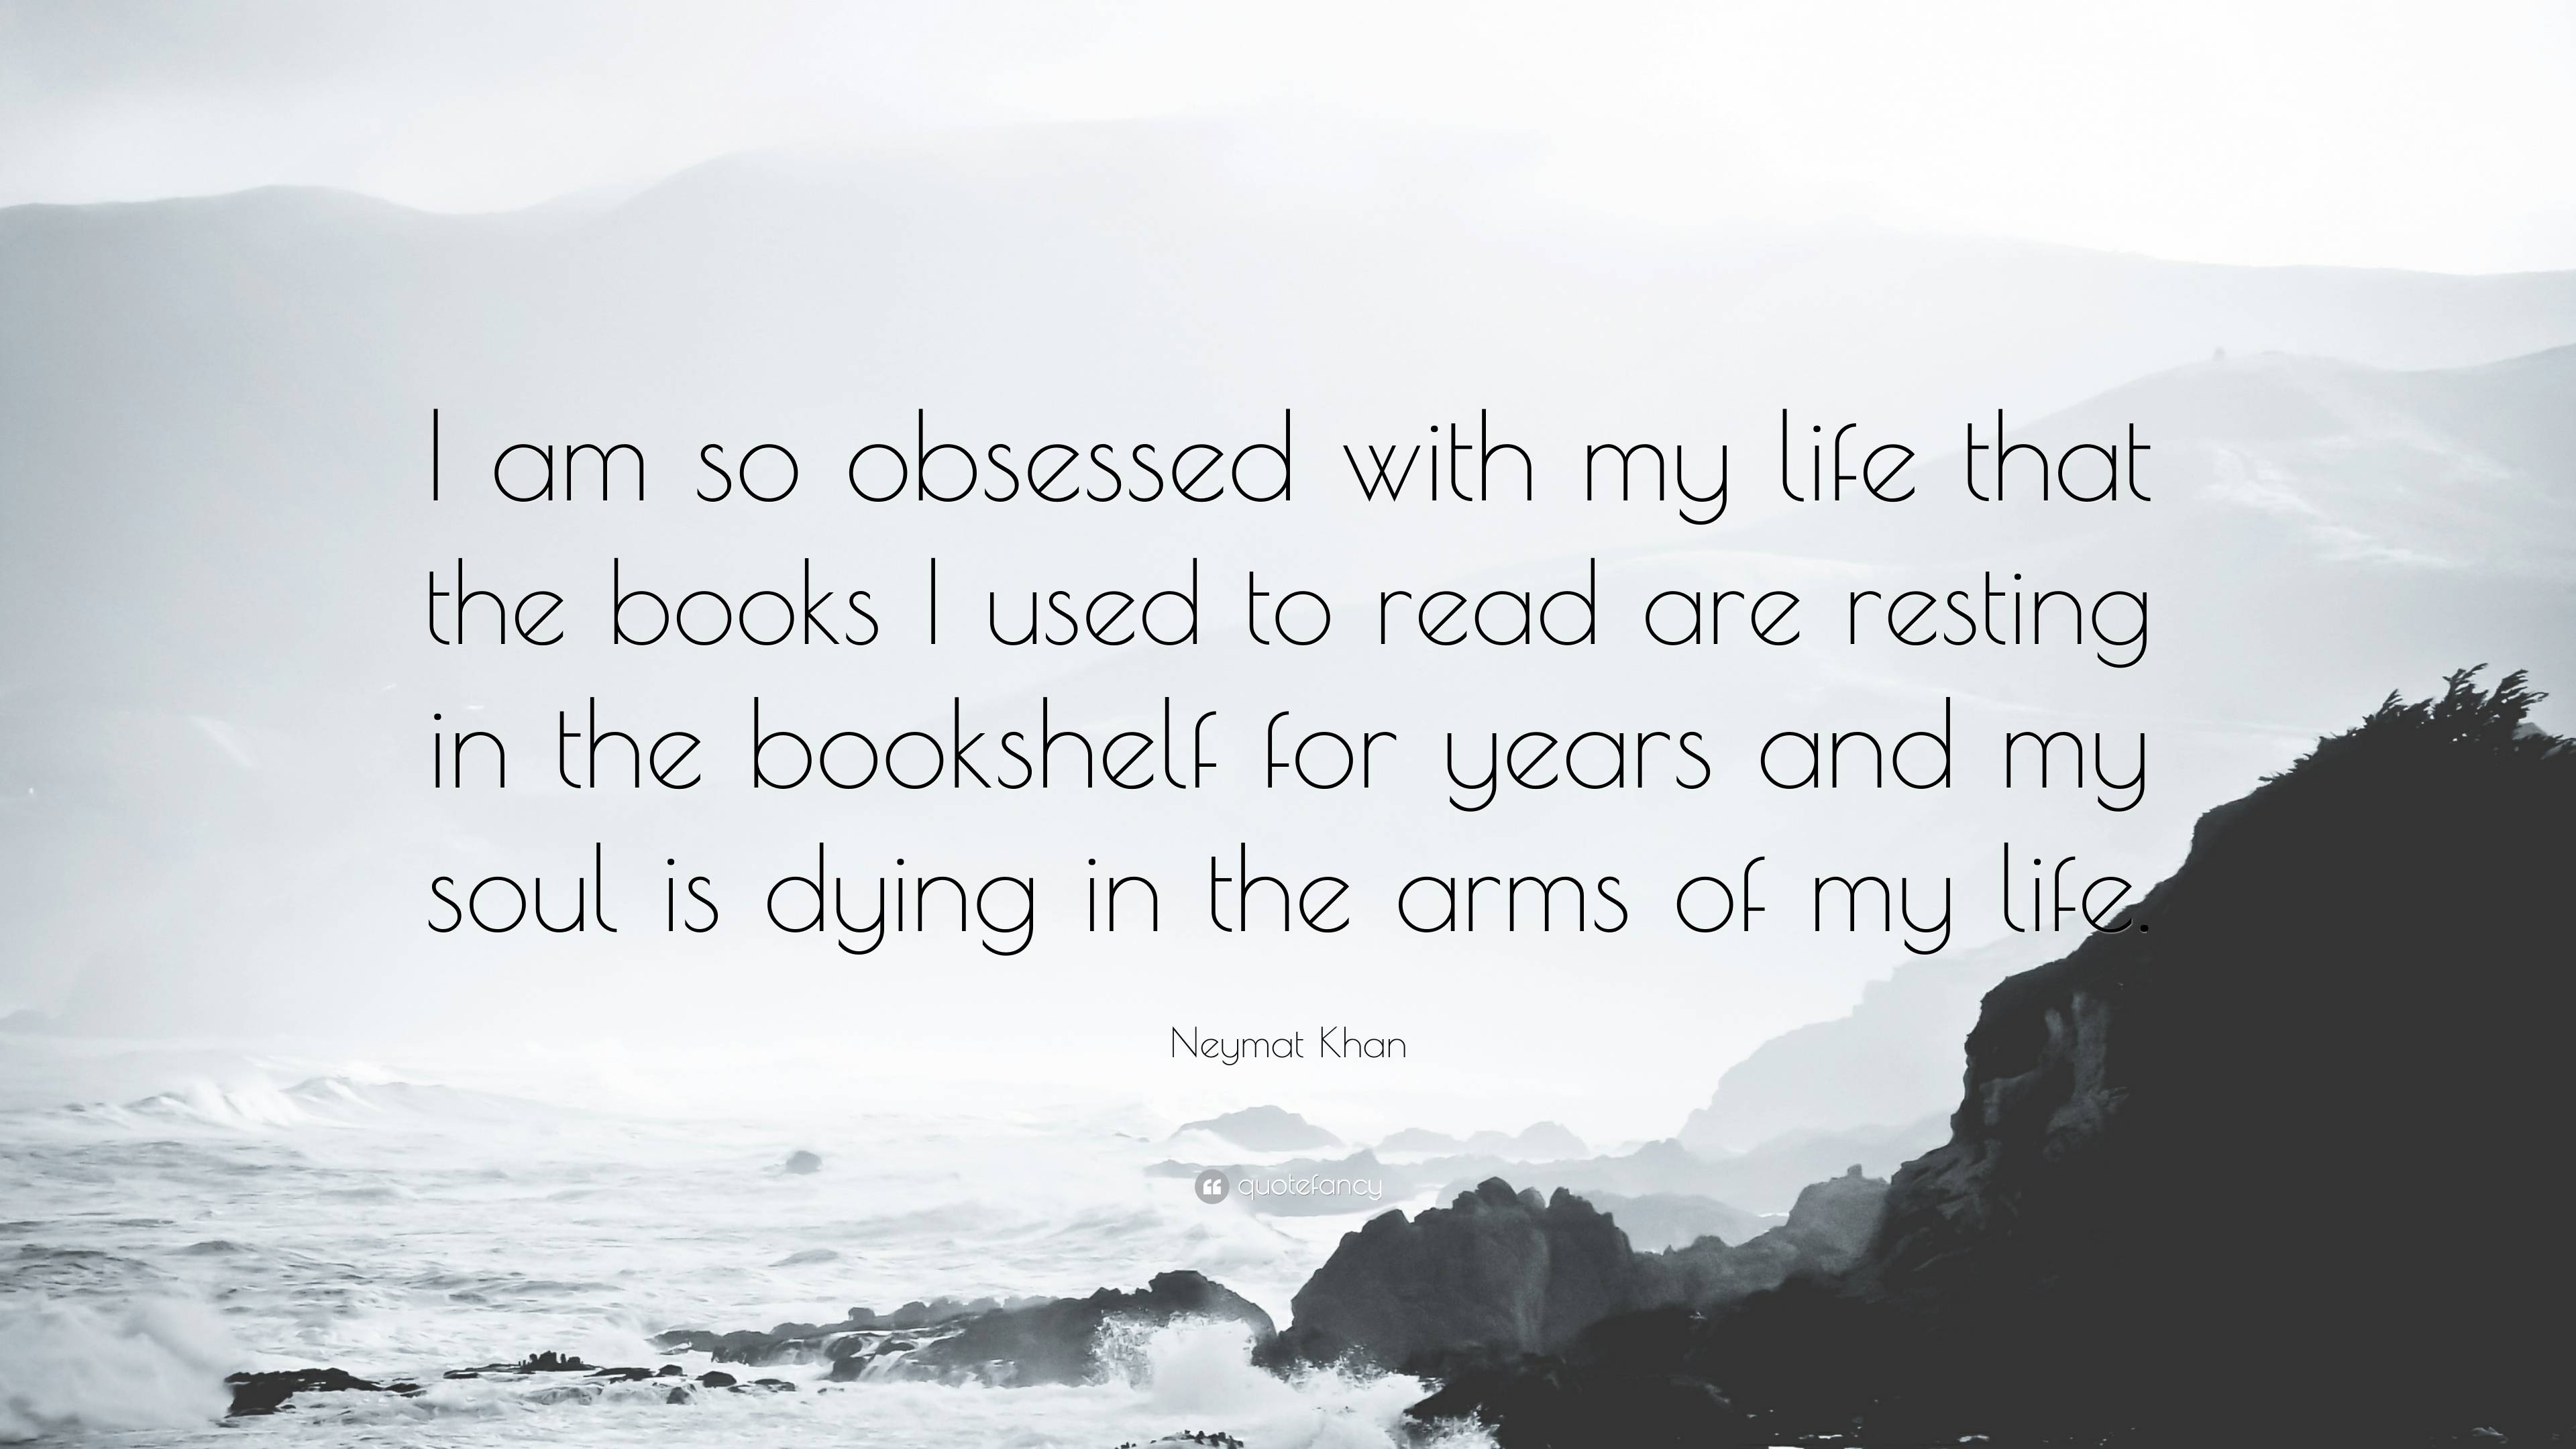 Neymat Khan Quote: “I am so obsessed with my life that the books I